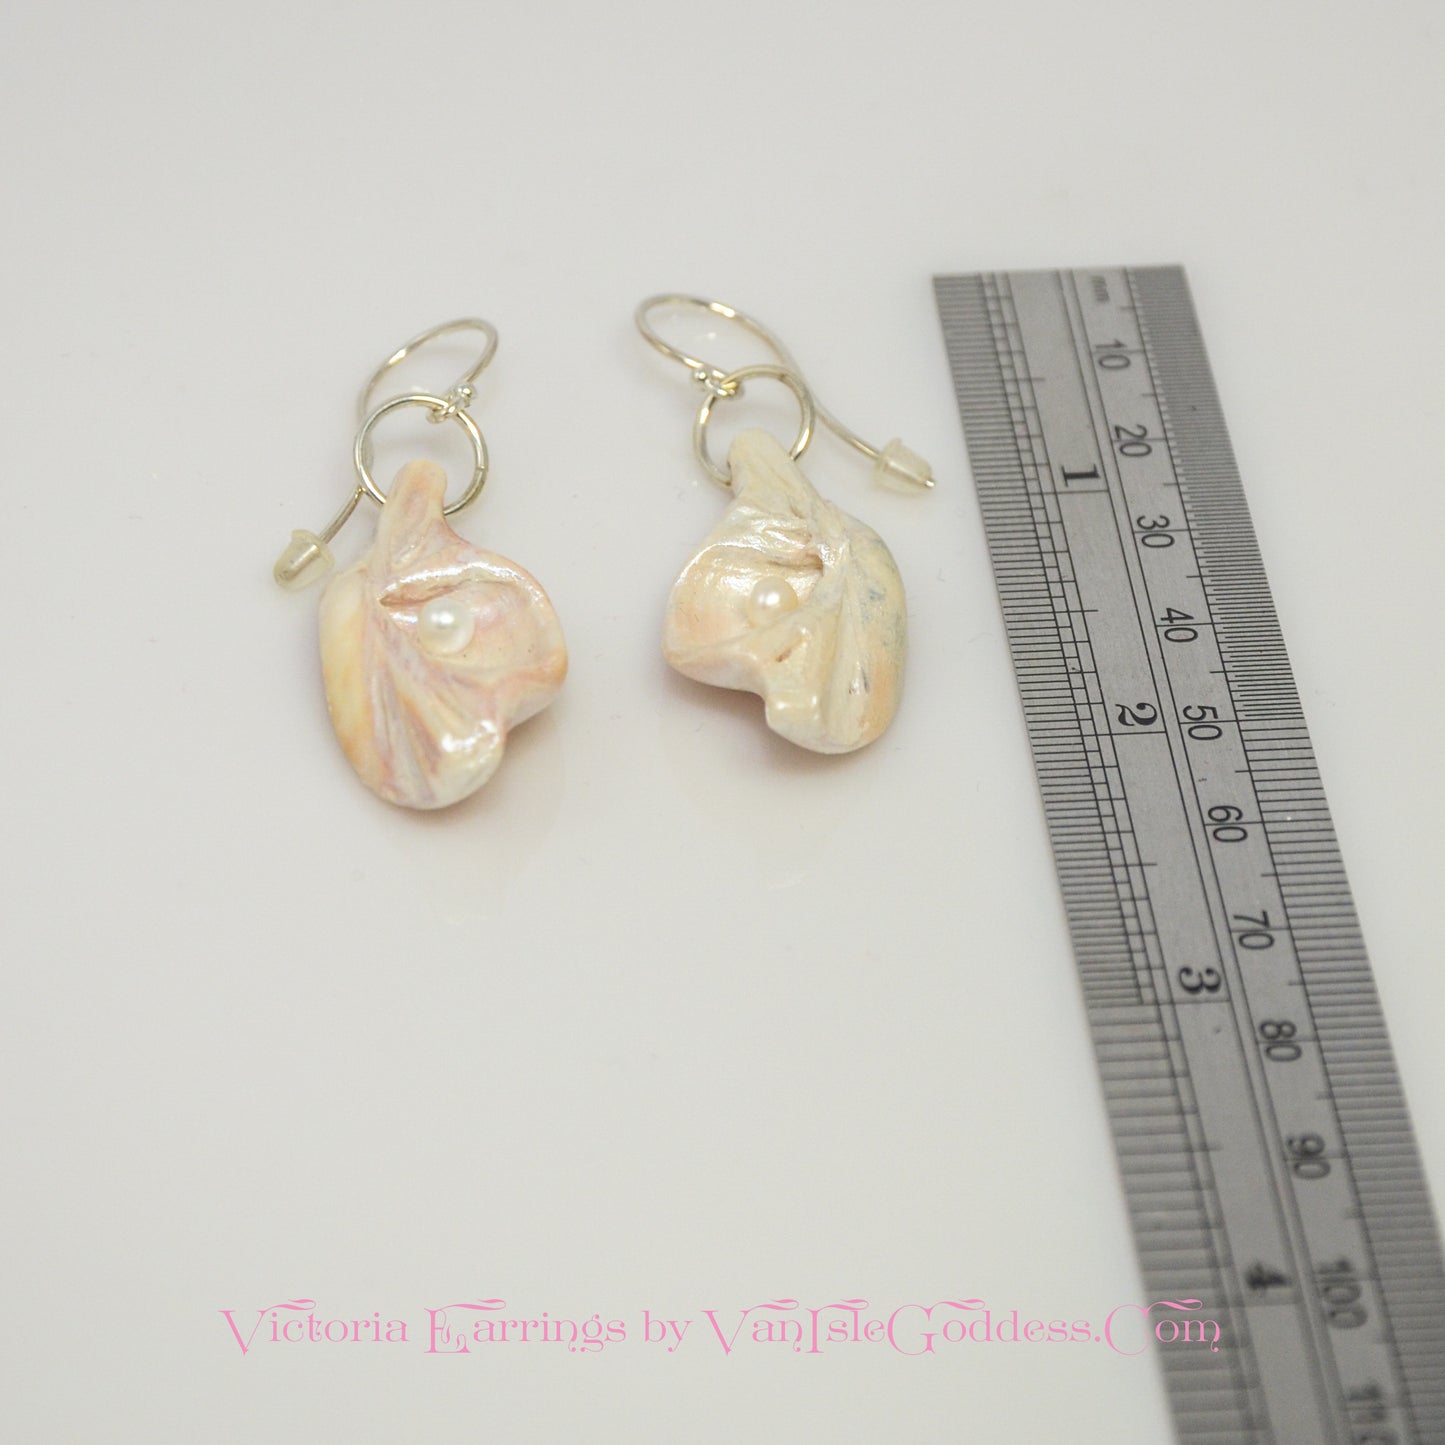 Victoria natural seashell earrings with real baby freshwater pearls.  The earrings are shown with a ruler so the viewer can see the length of the earrings.